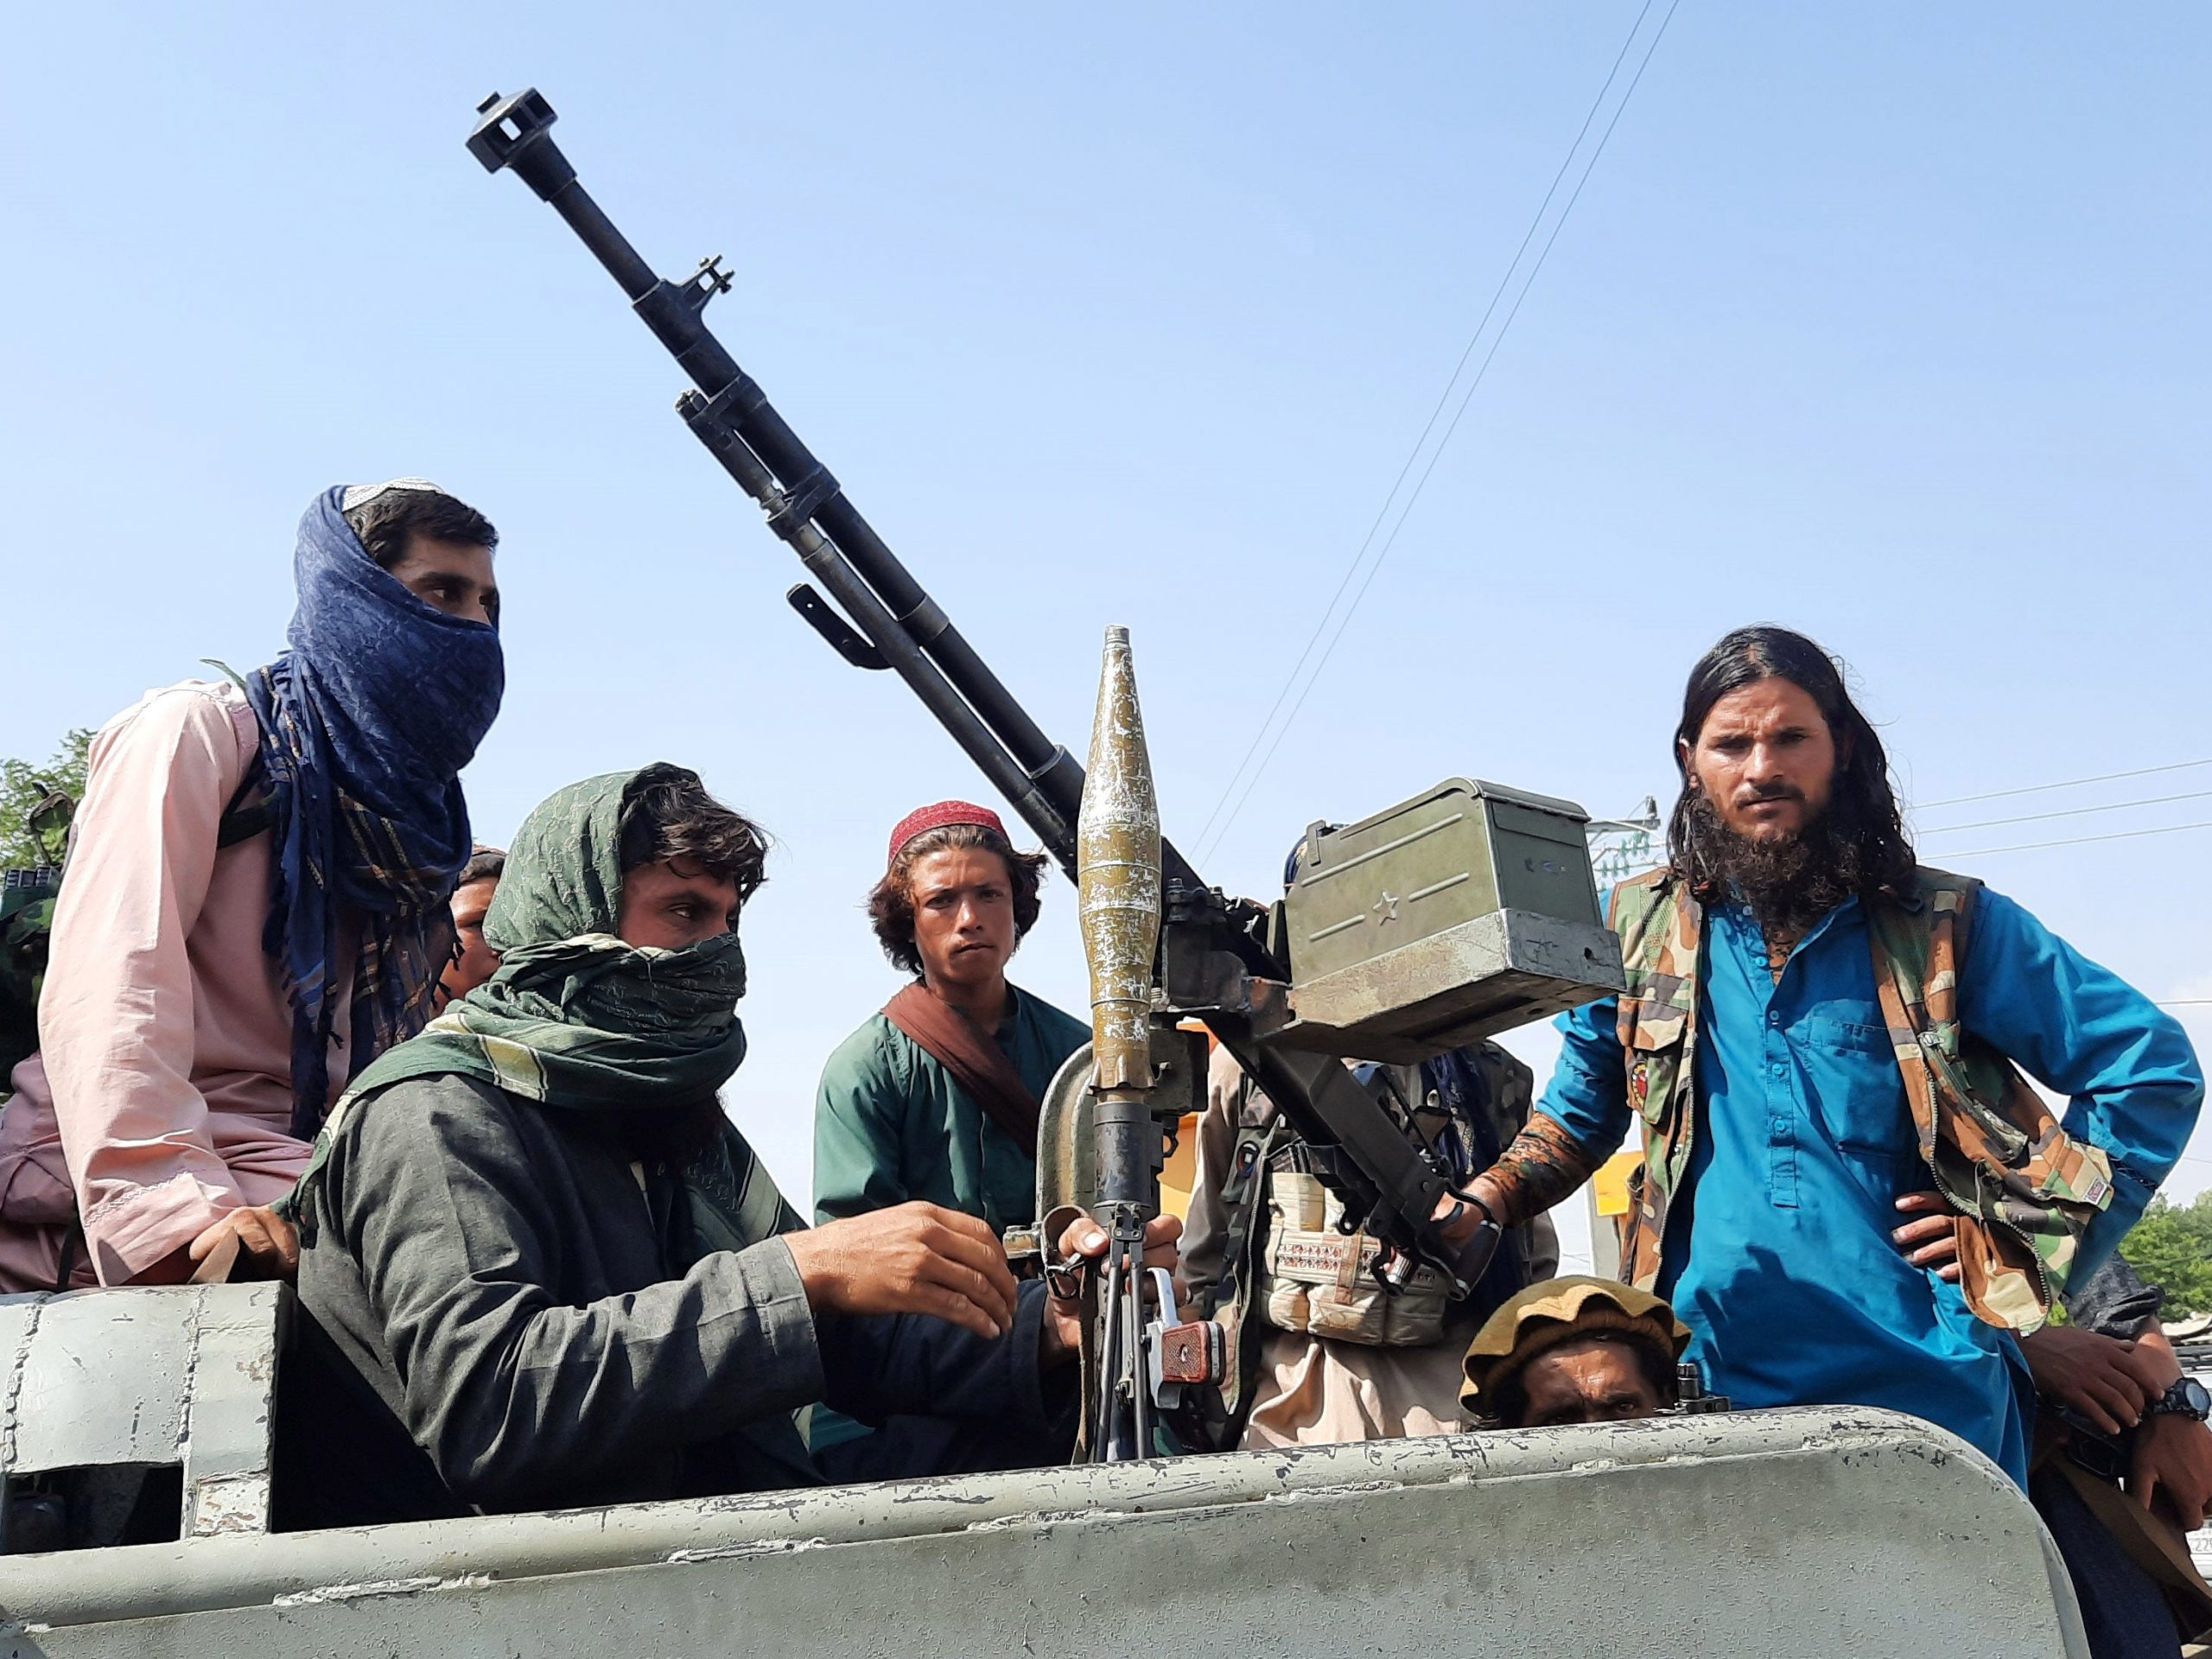 taliban fighters armed laghman afghanistan 2021